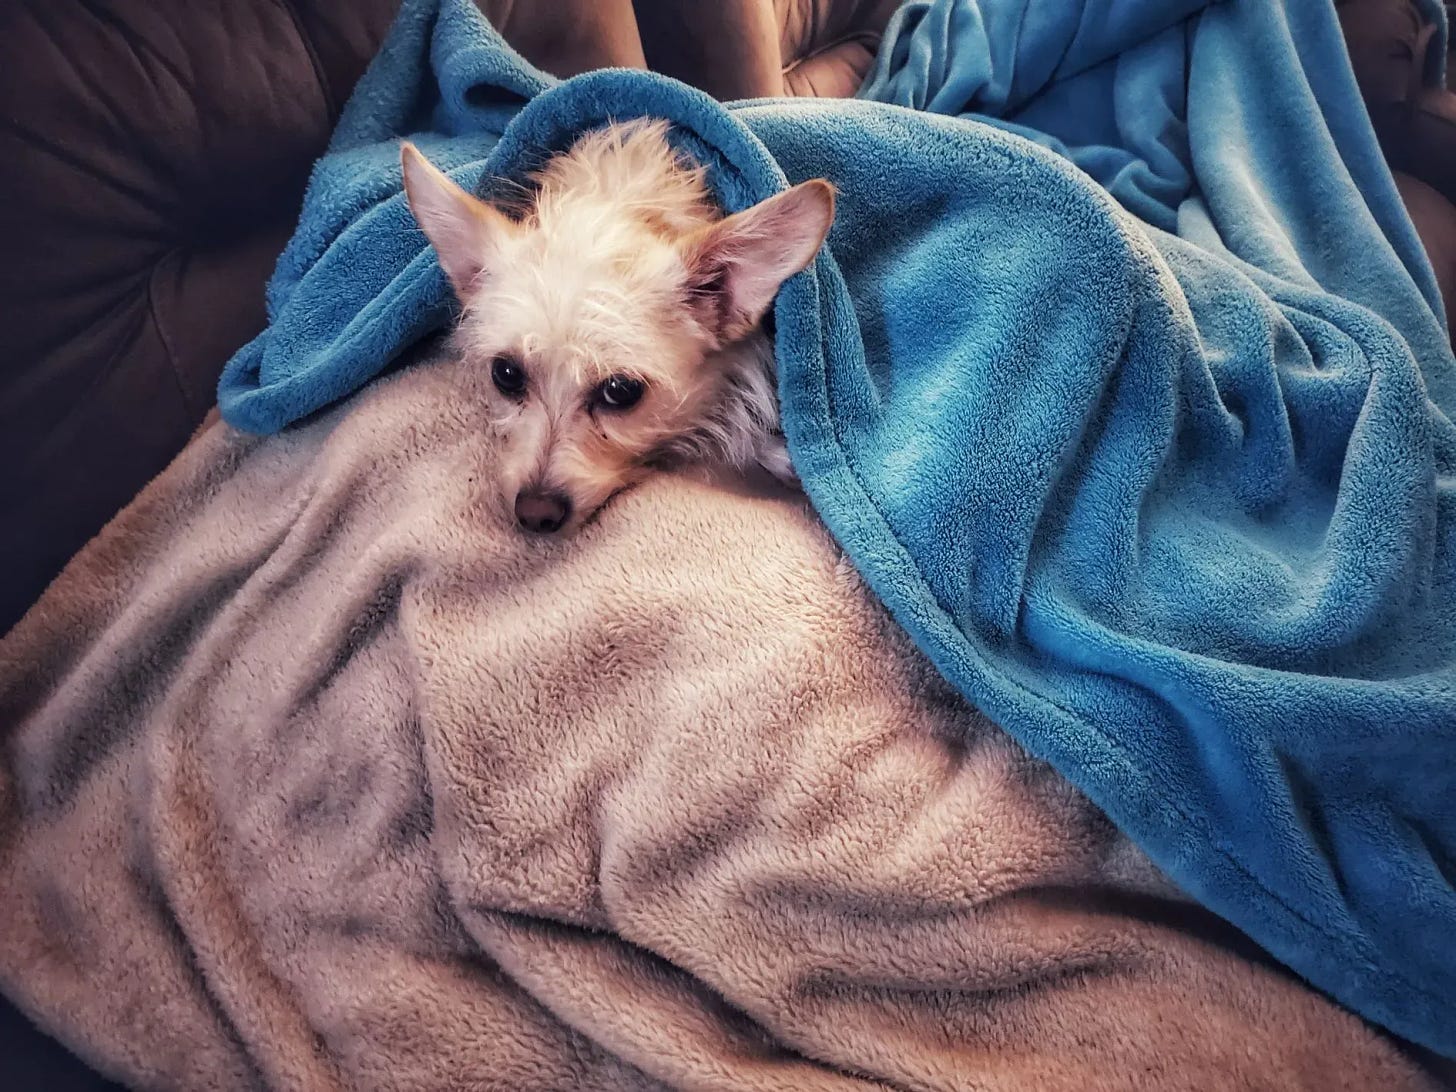 A very small white dog with scruffy fur and big chihuahua ears stares out from underneath a pile of blue and beige blankets